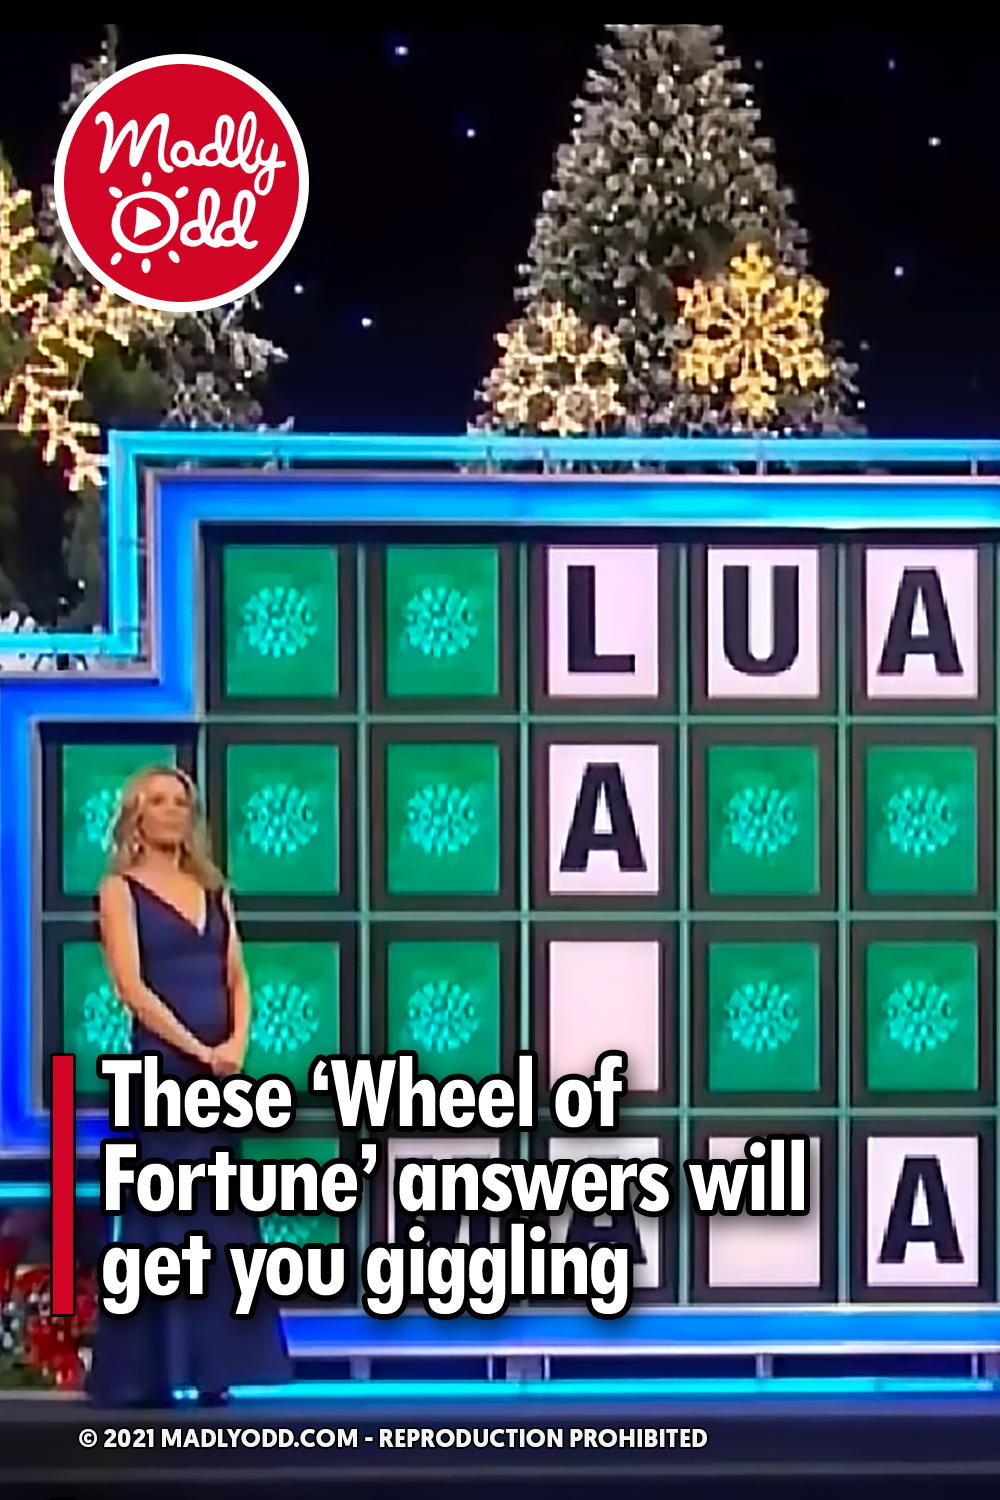 These ‘Wheel of Fortune’ answers will get you giggling